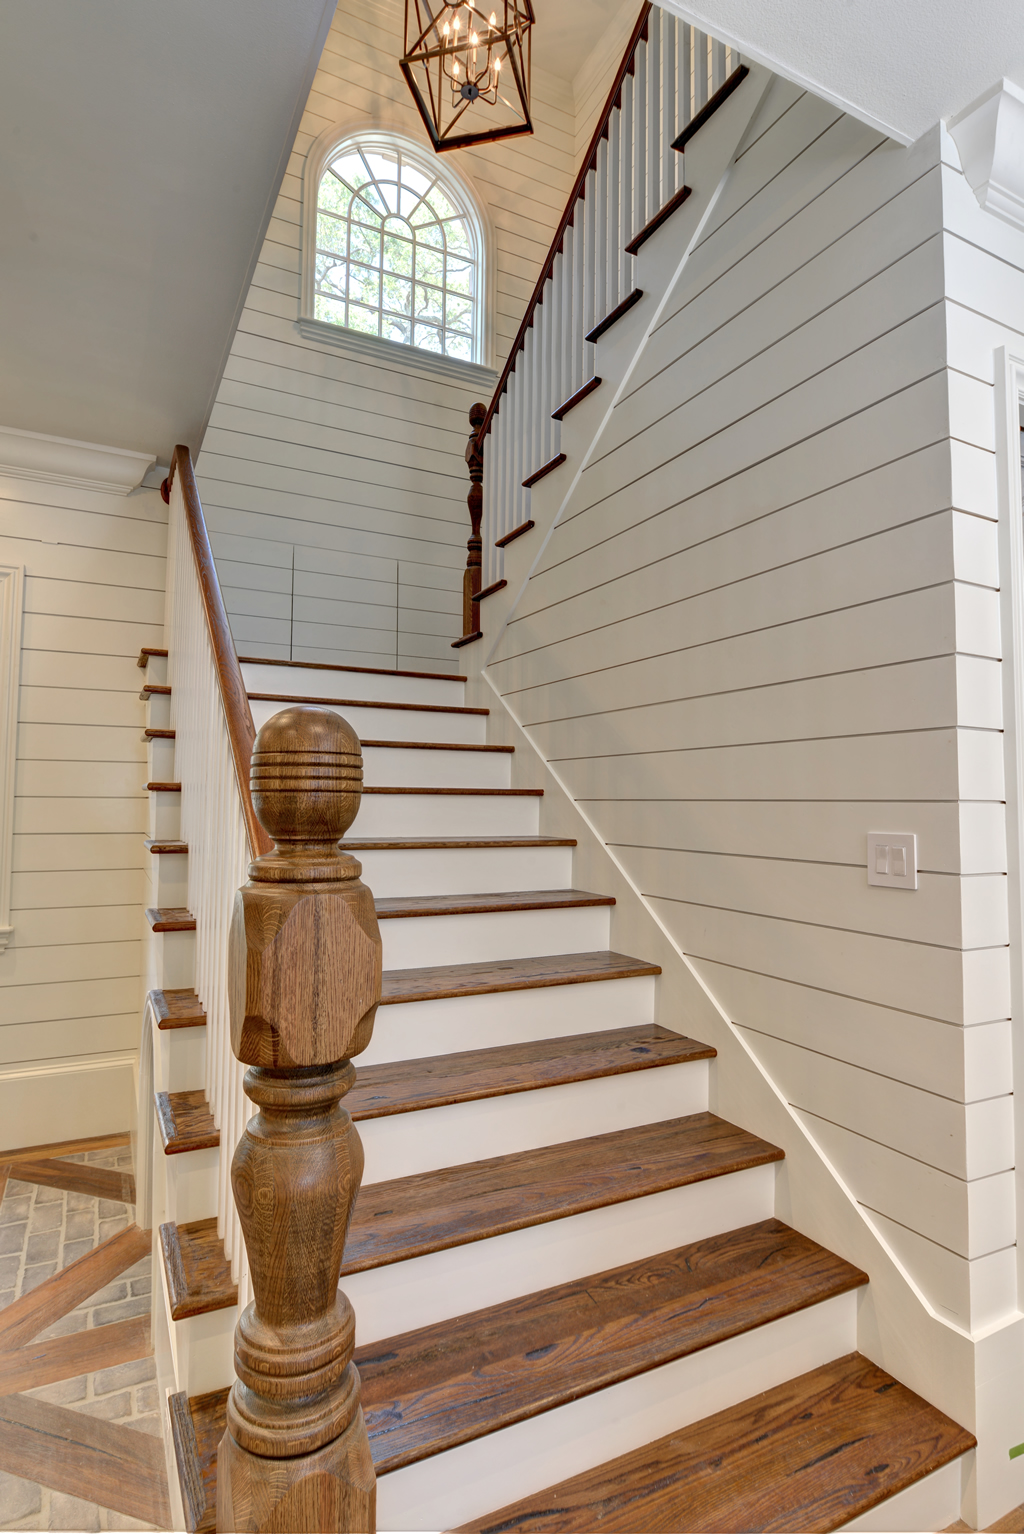  Staircase with white paneled walls and wooden accents